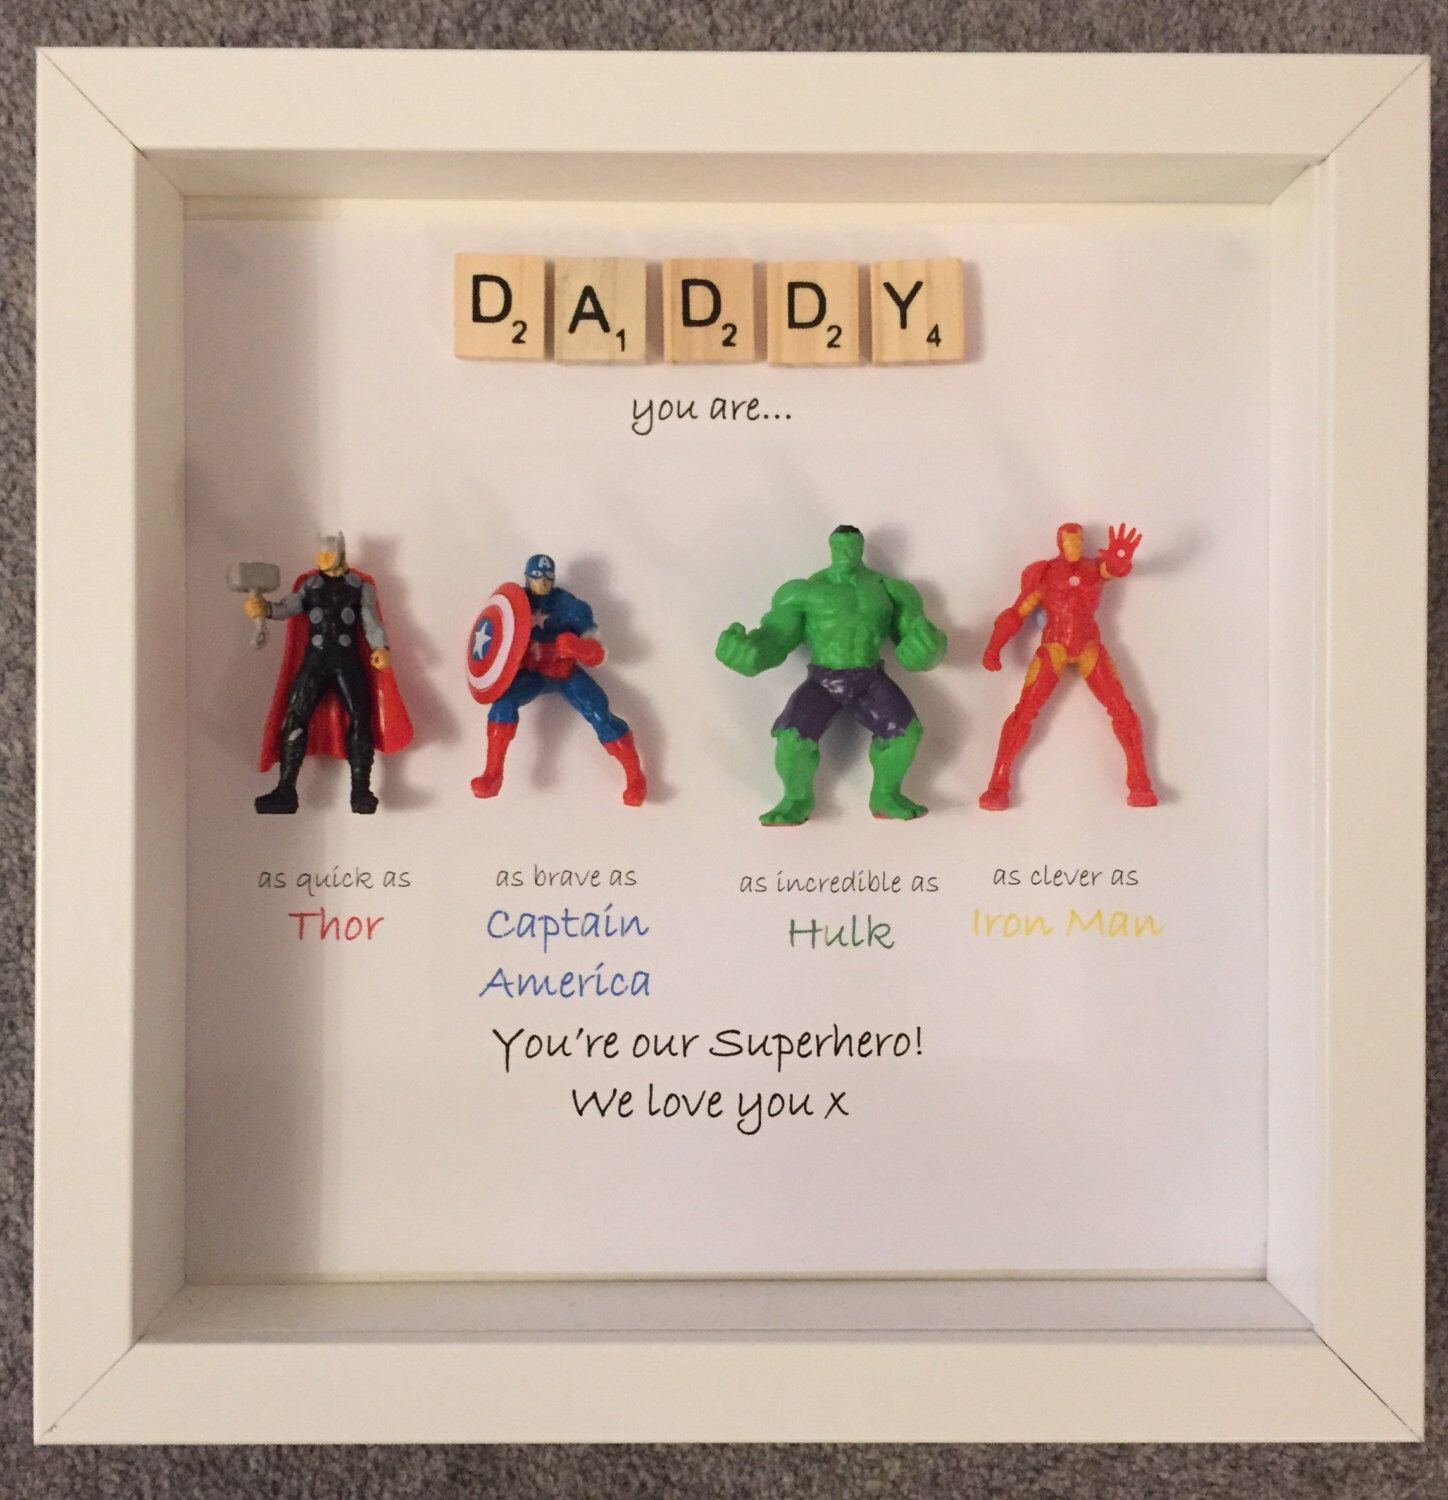 Birthday Gift Ideas Dad
 Avengers Superhero figures frame t Ideal for dad